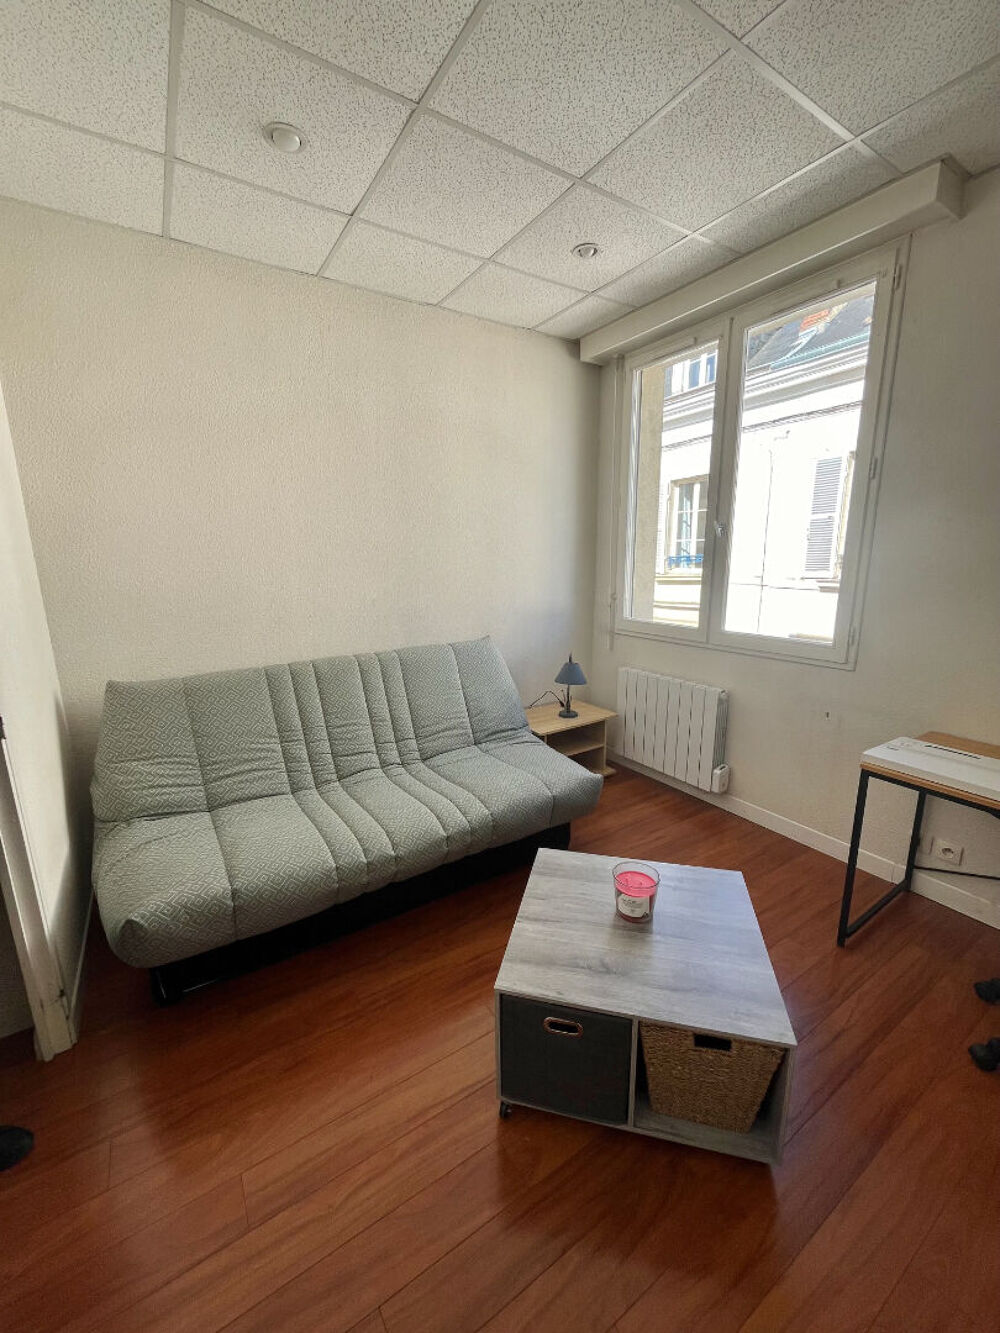 Location Appartement Appartement Orleans 1 pice(s) Orleans